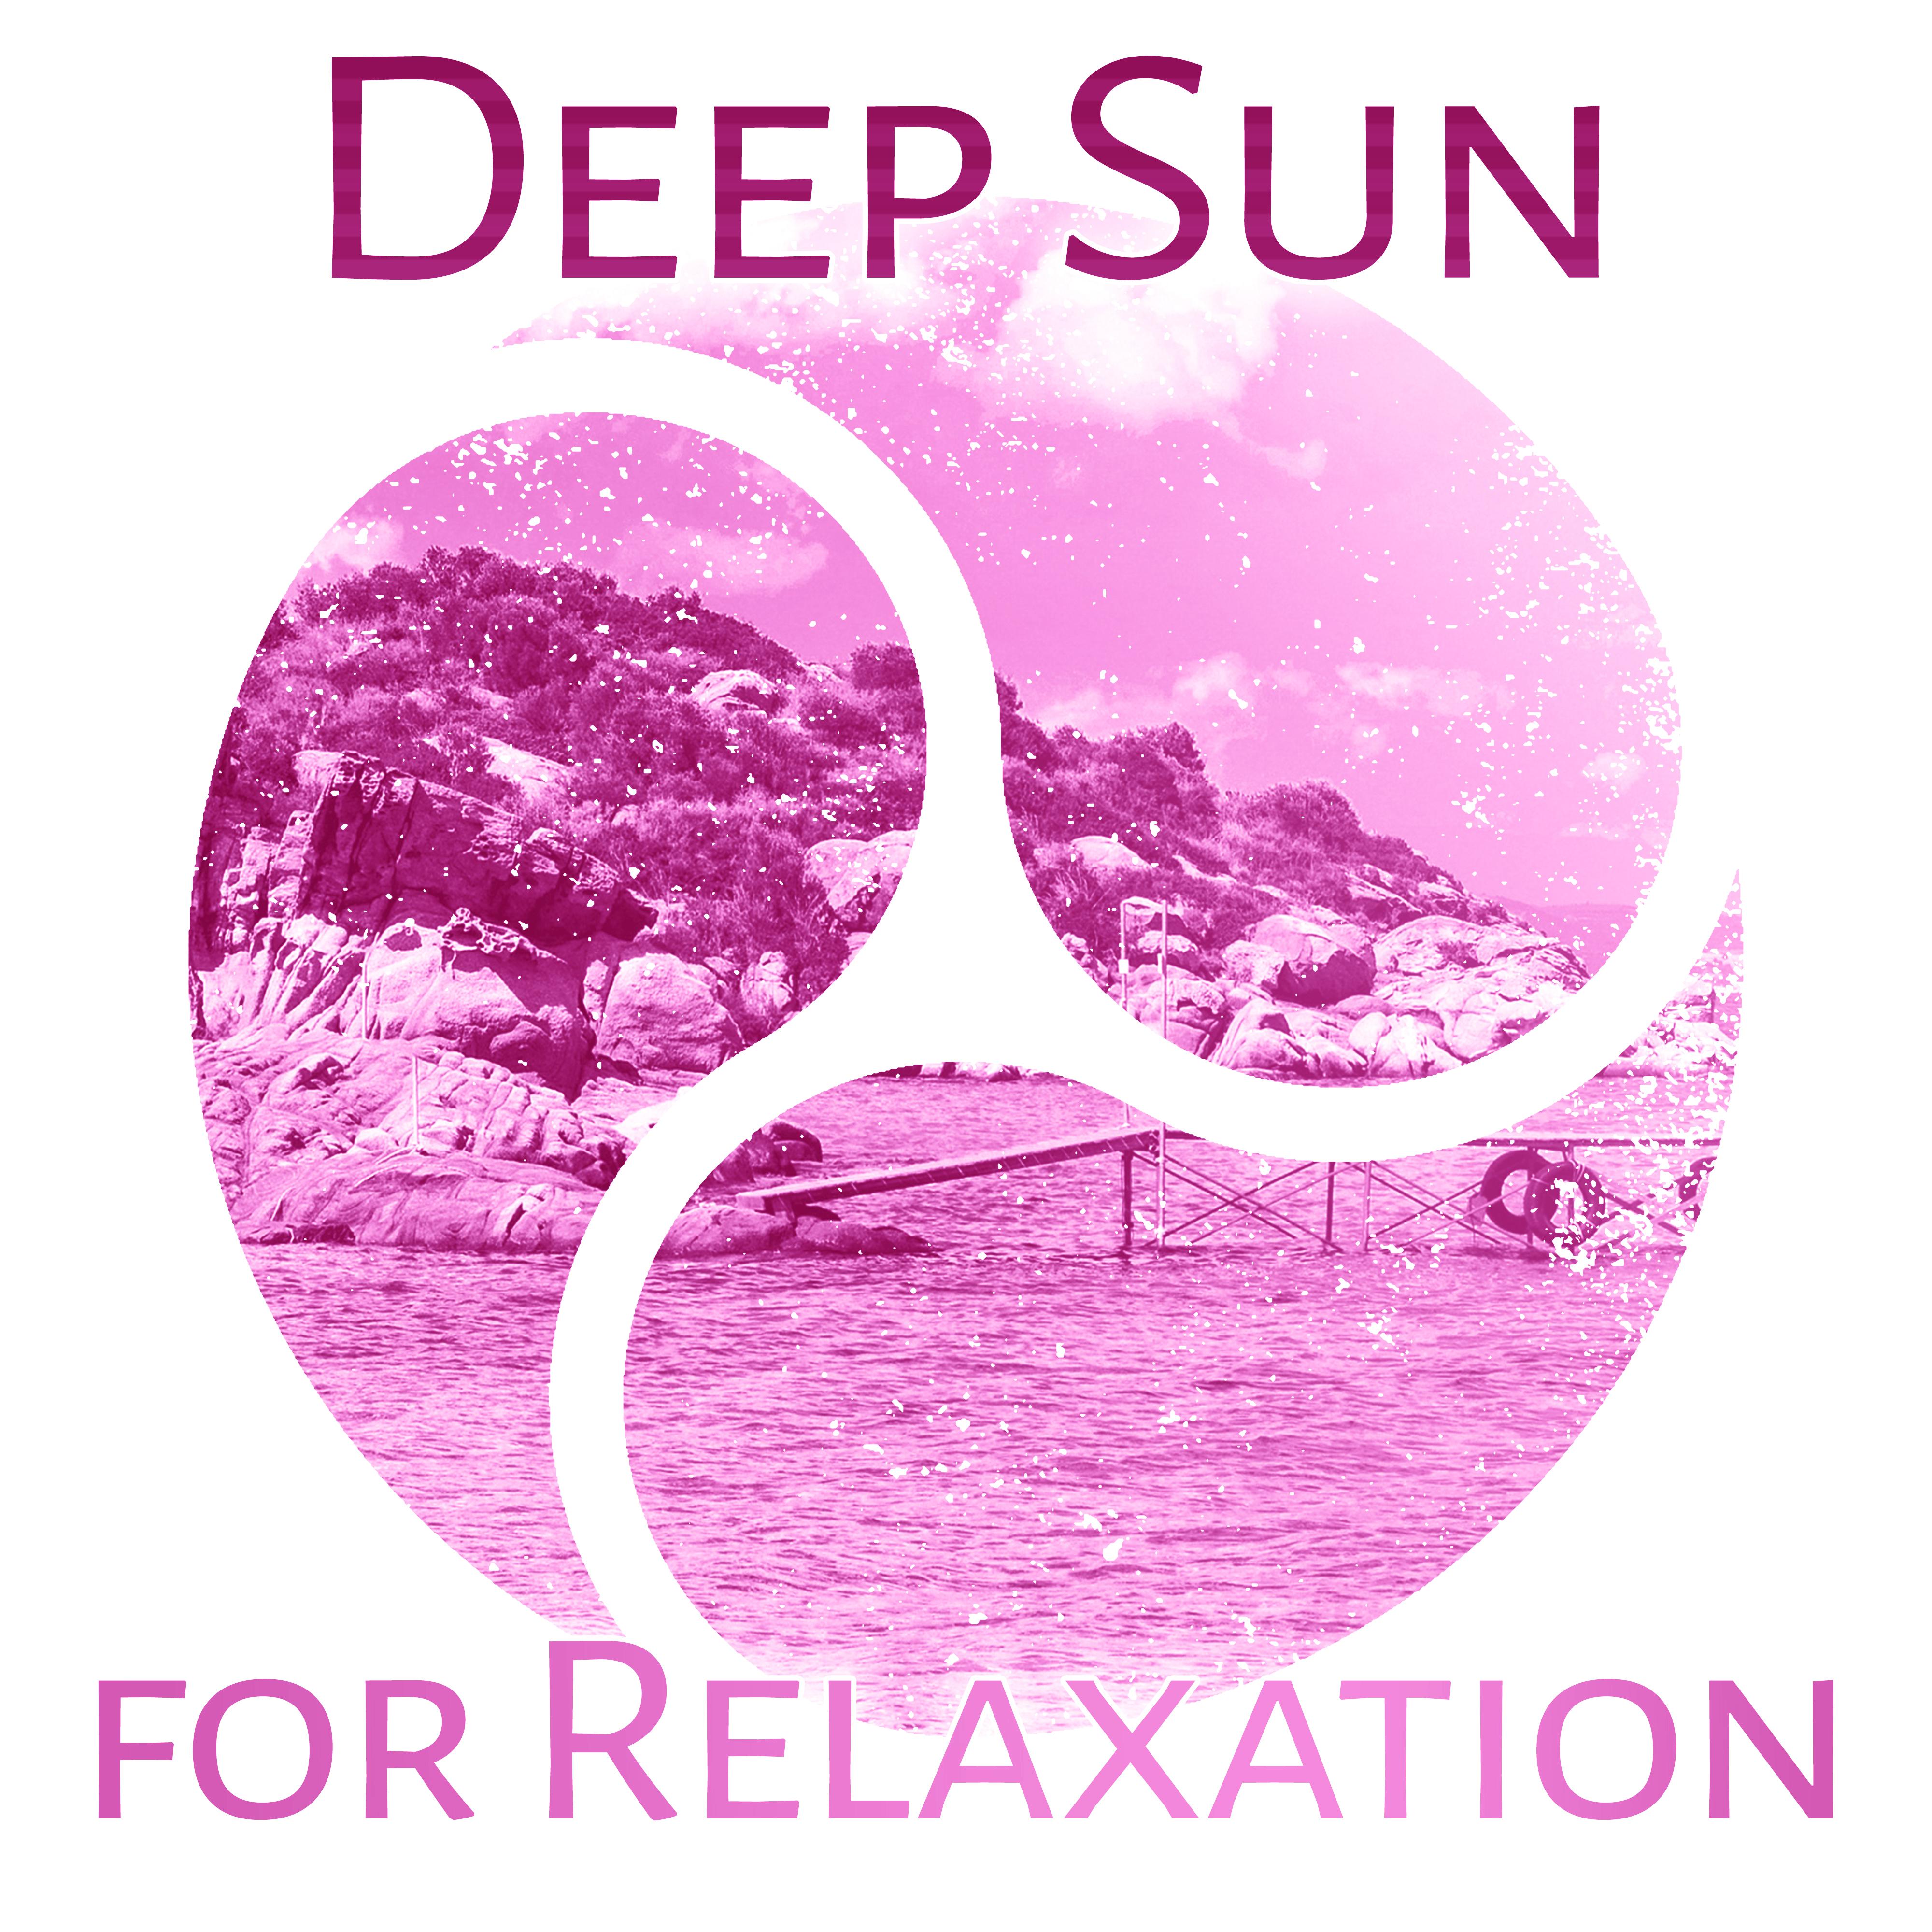 Deep Sun for Relaxation – Chillout Music, Summertime, Beach Party, Total Rest, Relaxation Songs